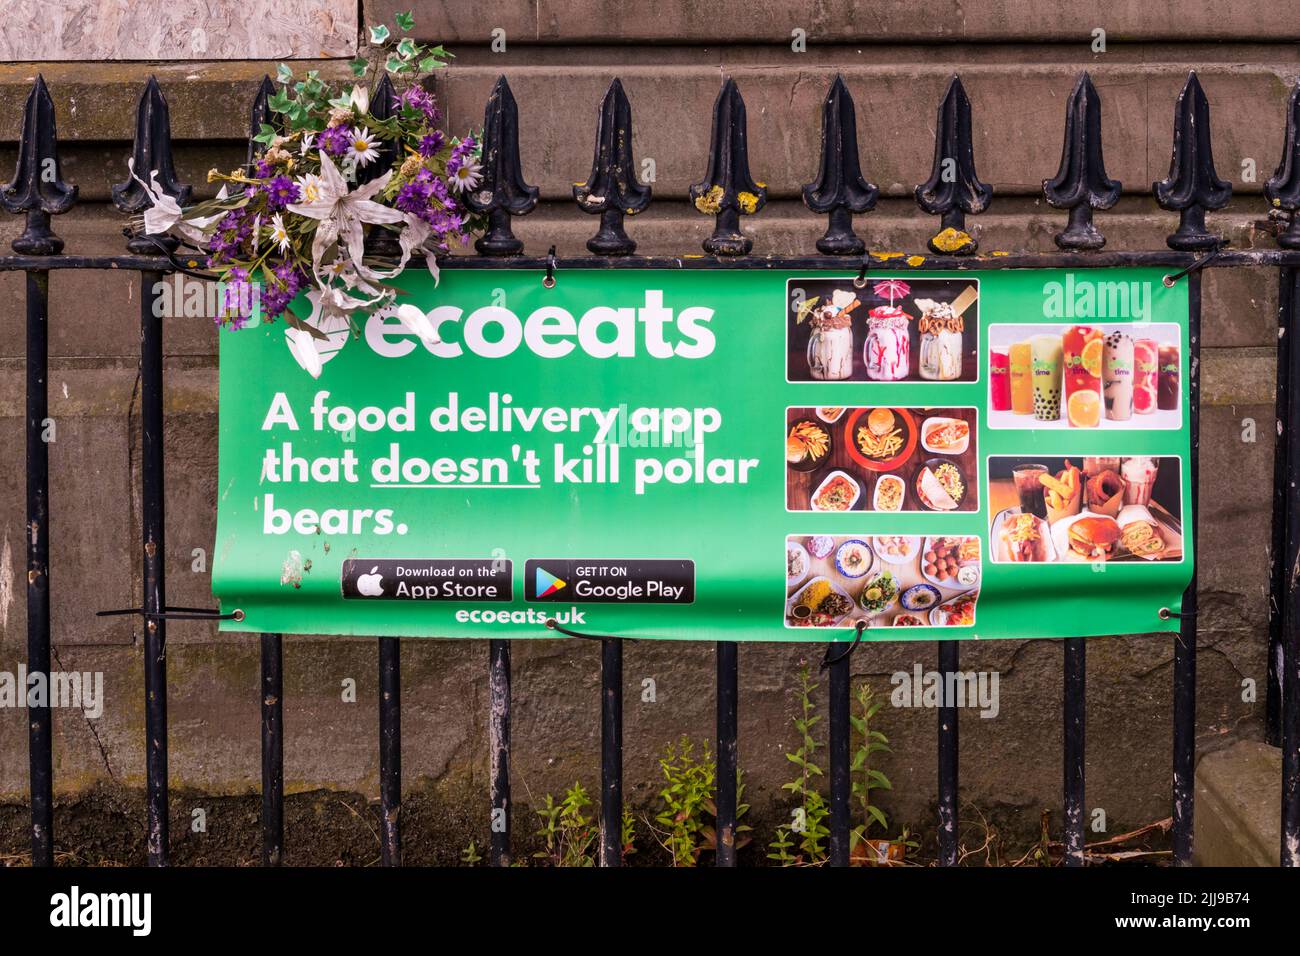 An advertisement for the ecoeats grocery delivery app. Stock Photo